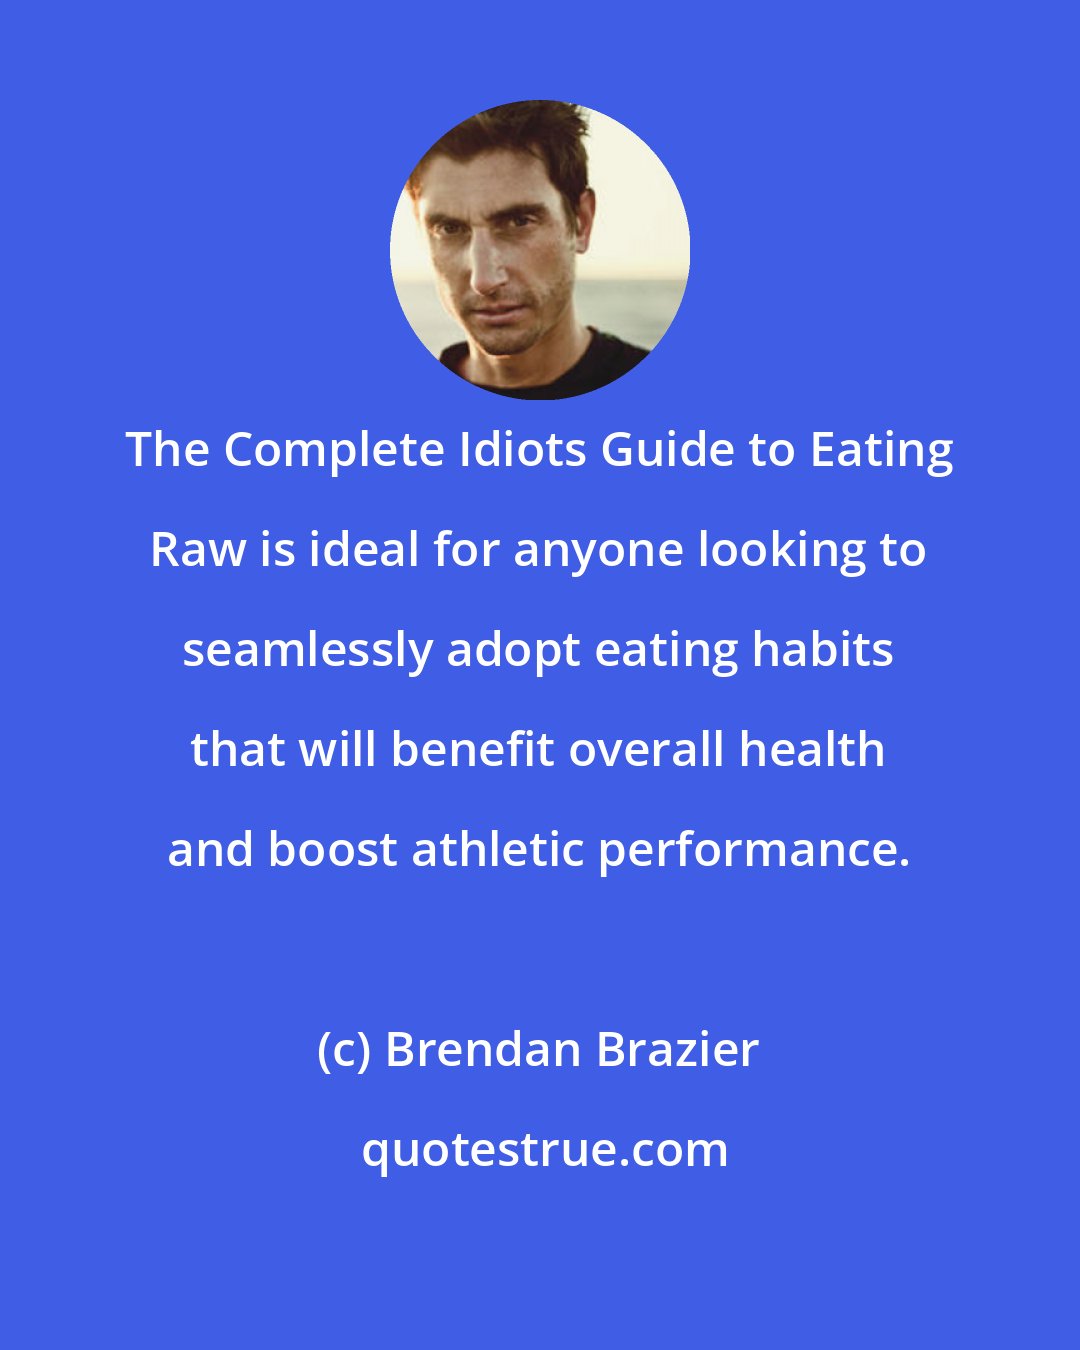 Brendan Brazier: The Complete Idiots Guide to Eating Raw is ideal for anyone looking to seamlessly adopt eating habits that will benefit overall health and boost athletic performance.